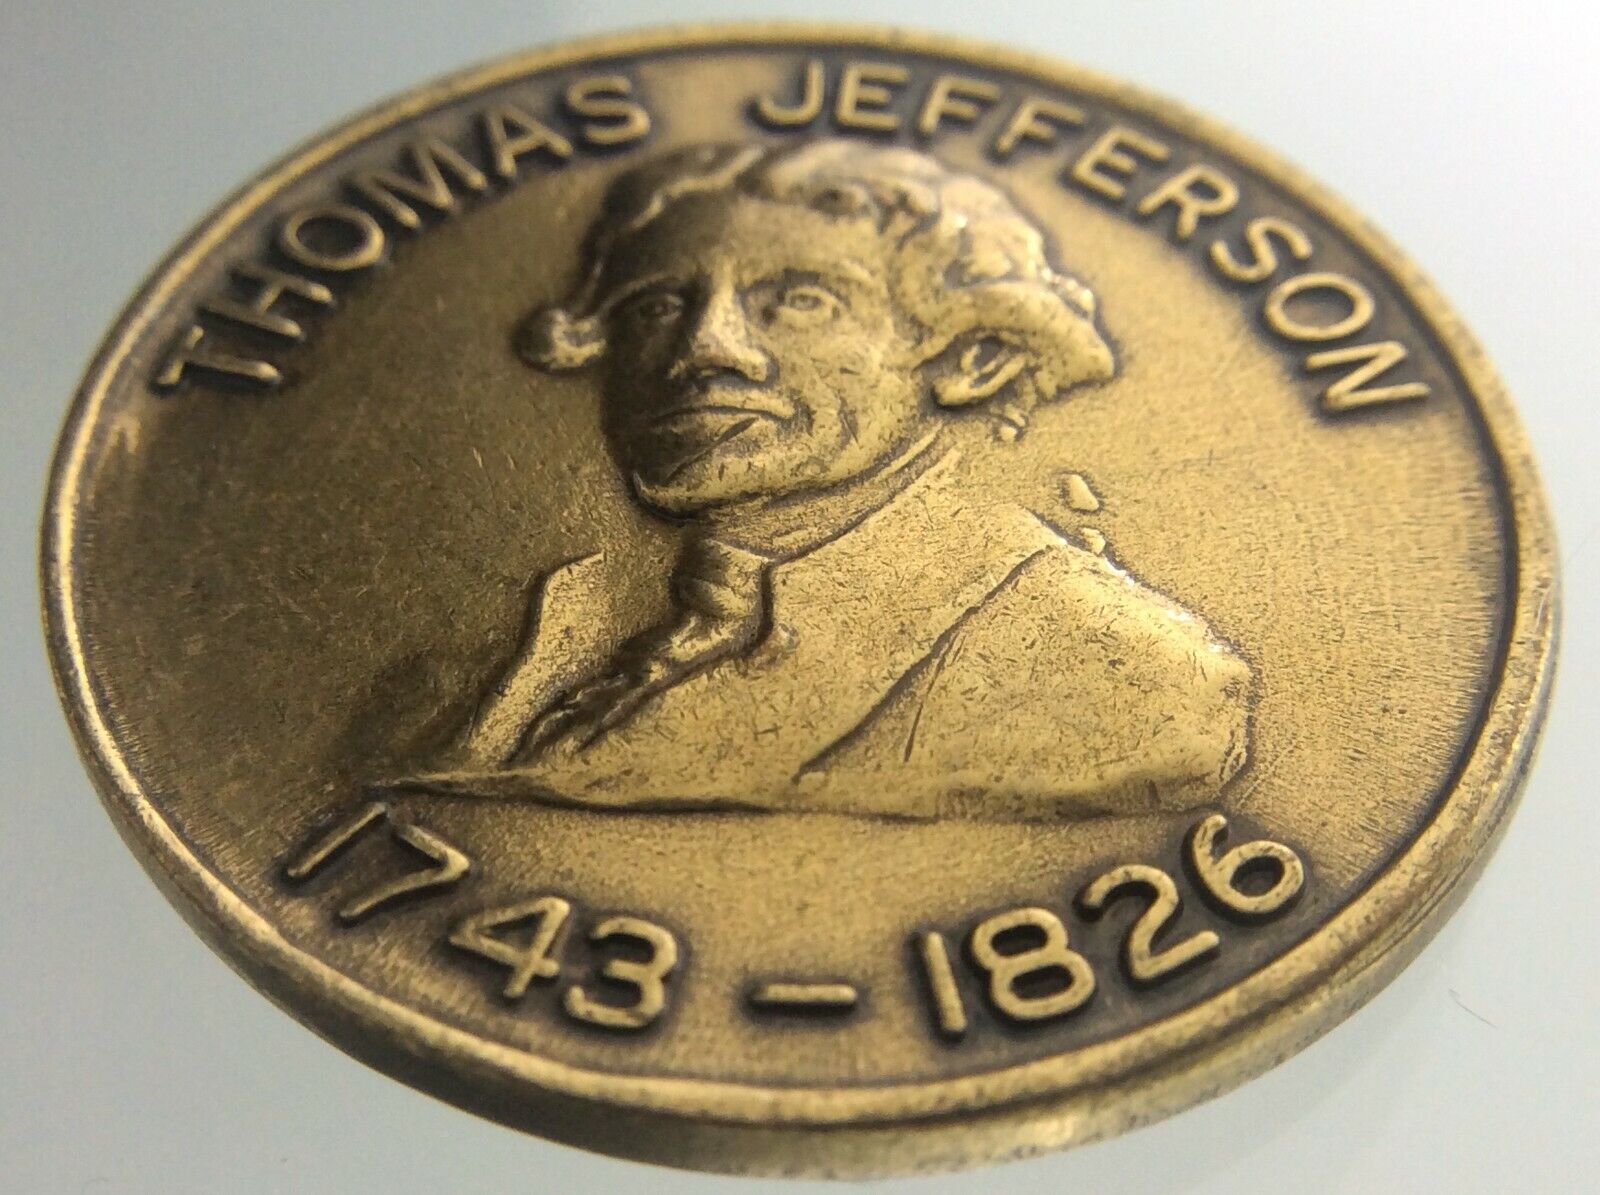 Thomas Jefferson Medallion 1743-1826 People Are Endowed With Certain Rights W668